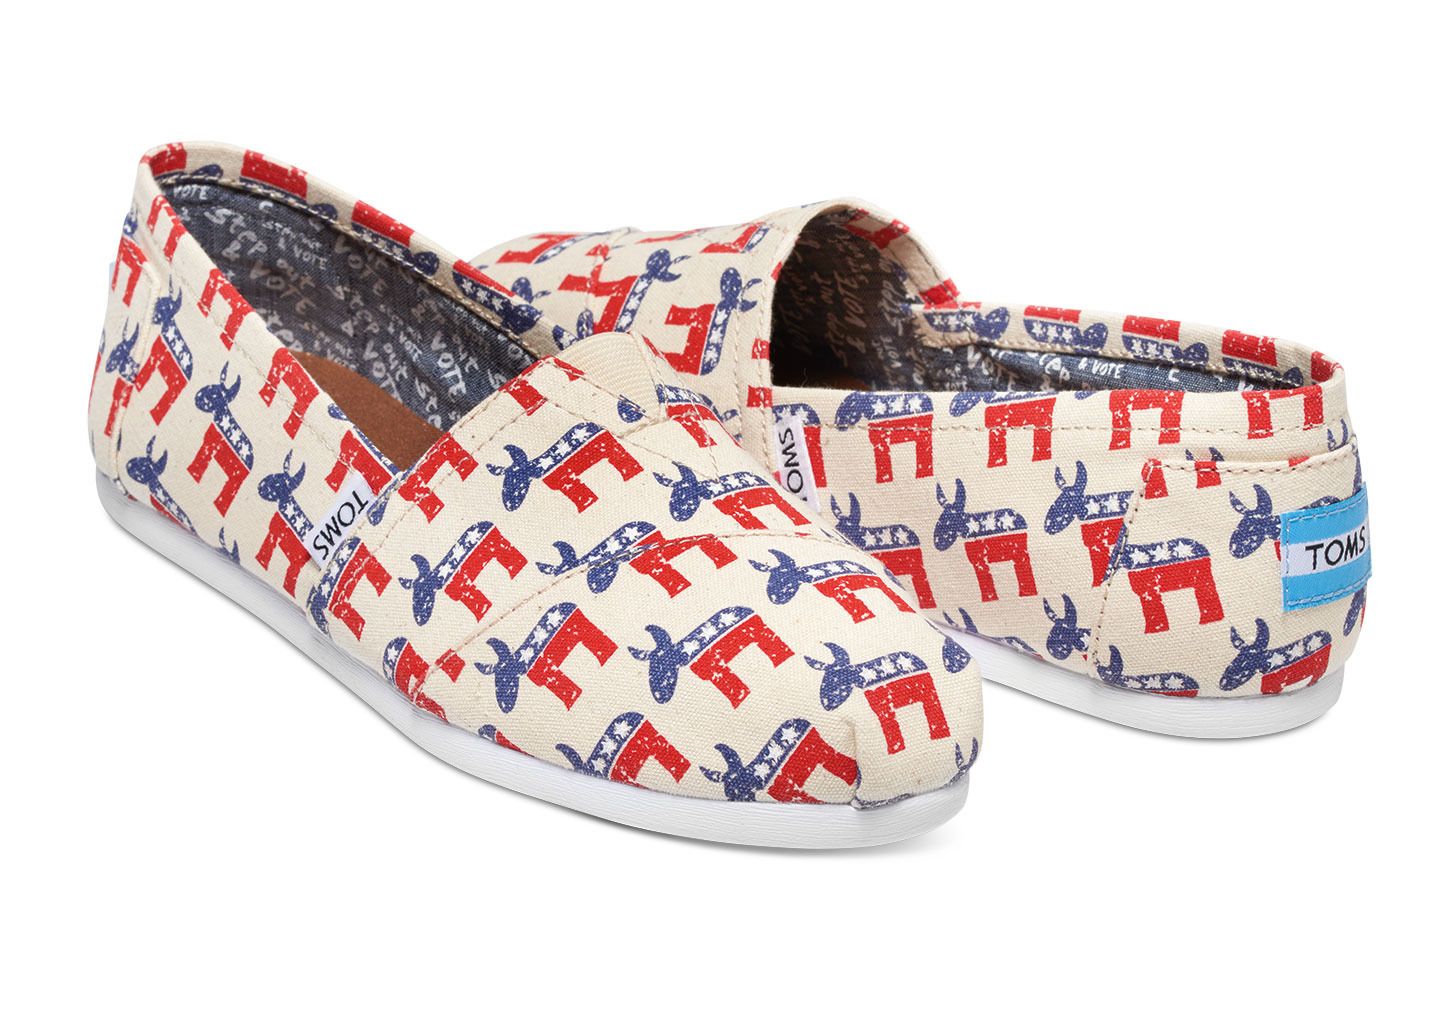 Democratic donkey shoes from TOMs show your political colors while donating to a child in need. Also available with elephants.